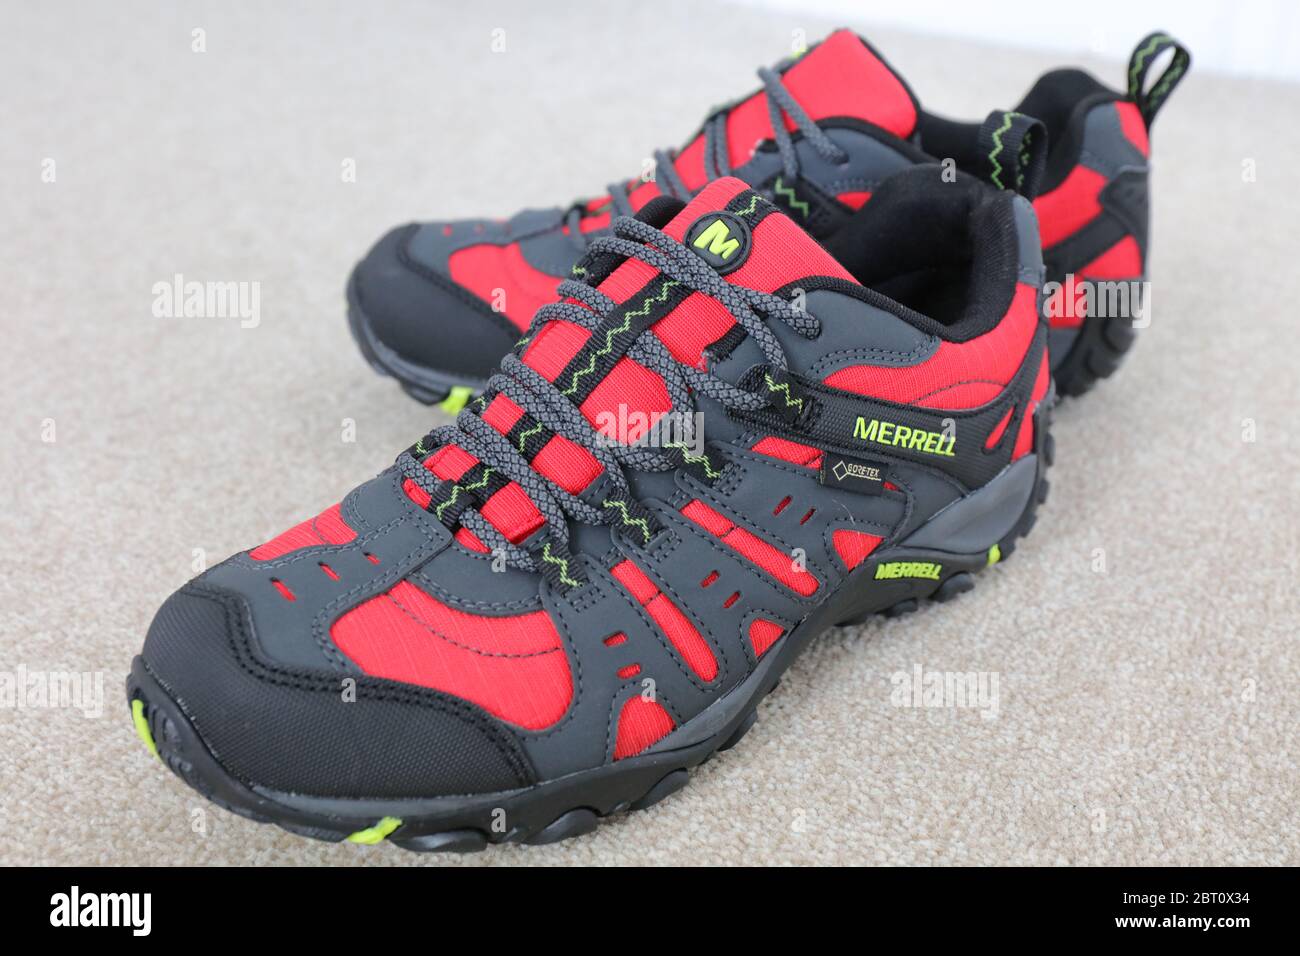 A Pair of a Merrell Red Accentor Sport GORE-TEX Trail Shoes Stock Photo -  Alamy